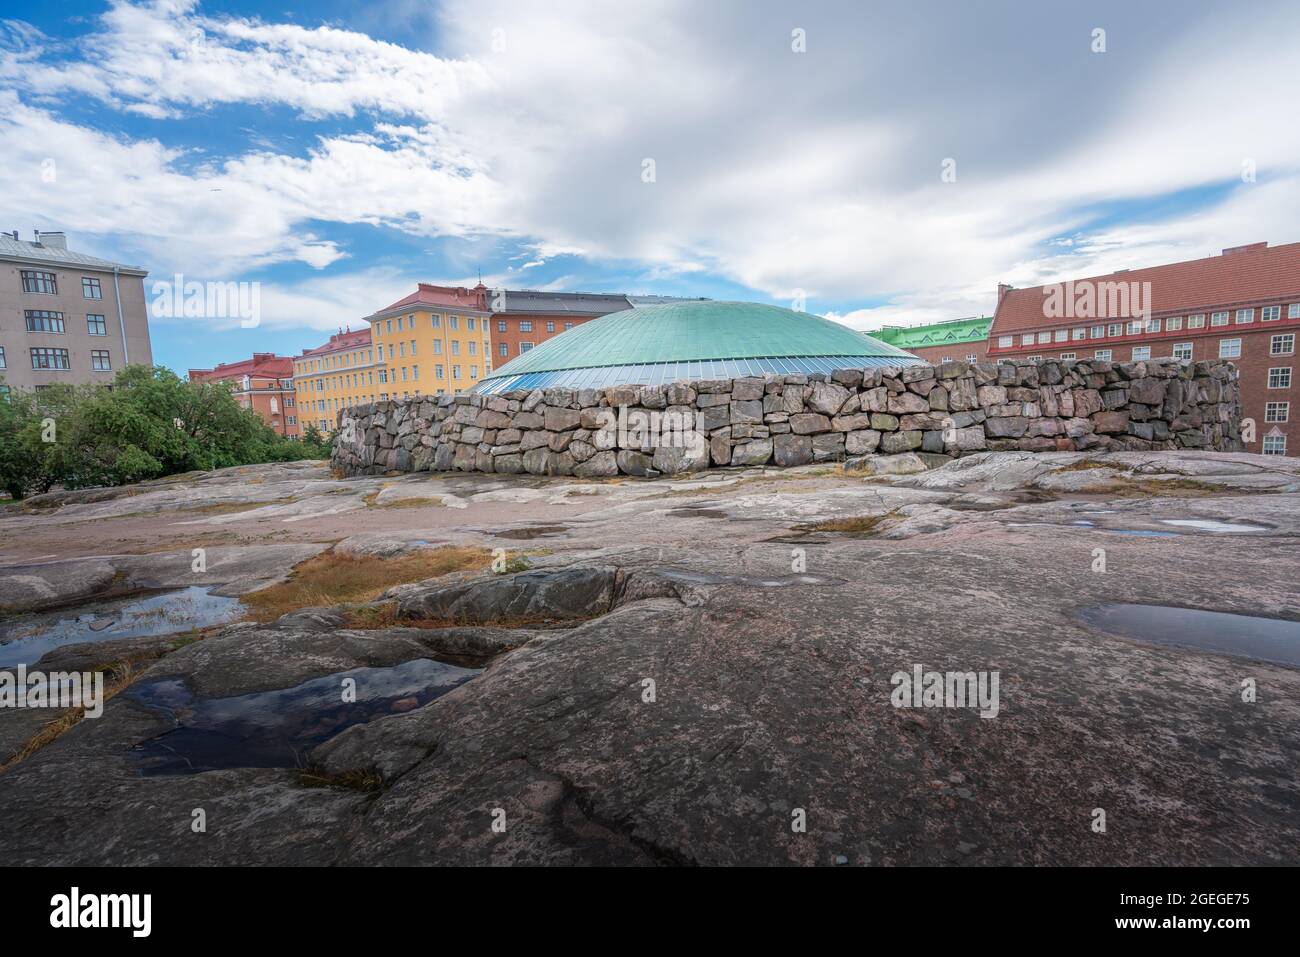 View of the dome of Temppeliaukio Church Interior - an Underground Church built on a rock - Helsinki, Finland Stock Photo